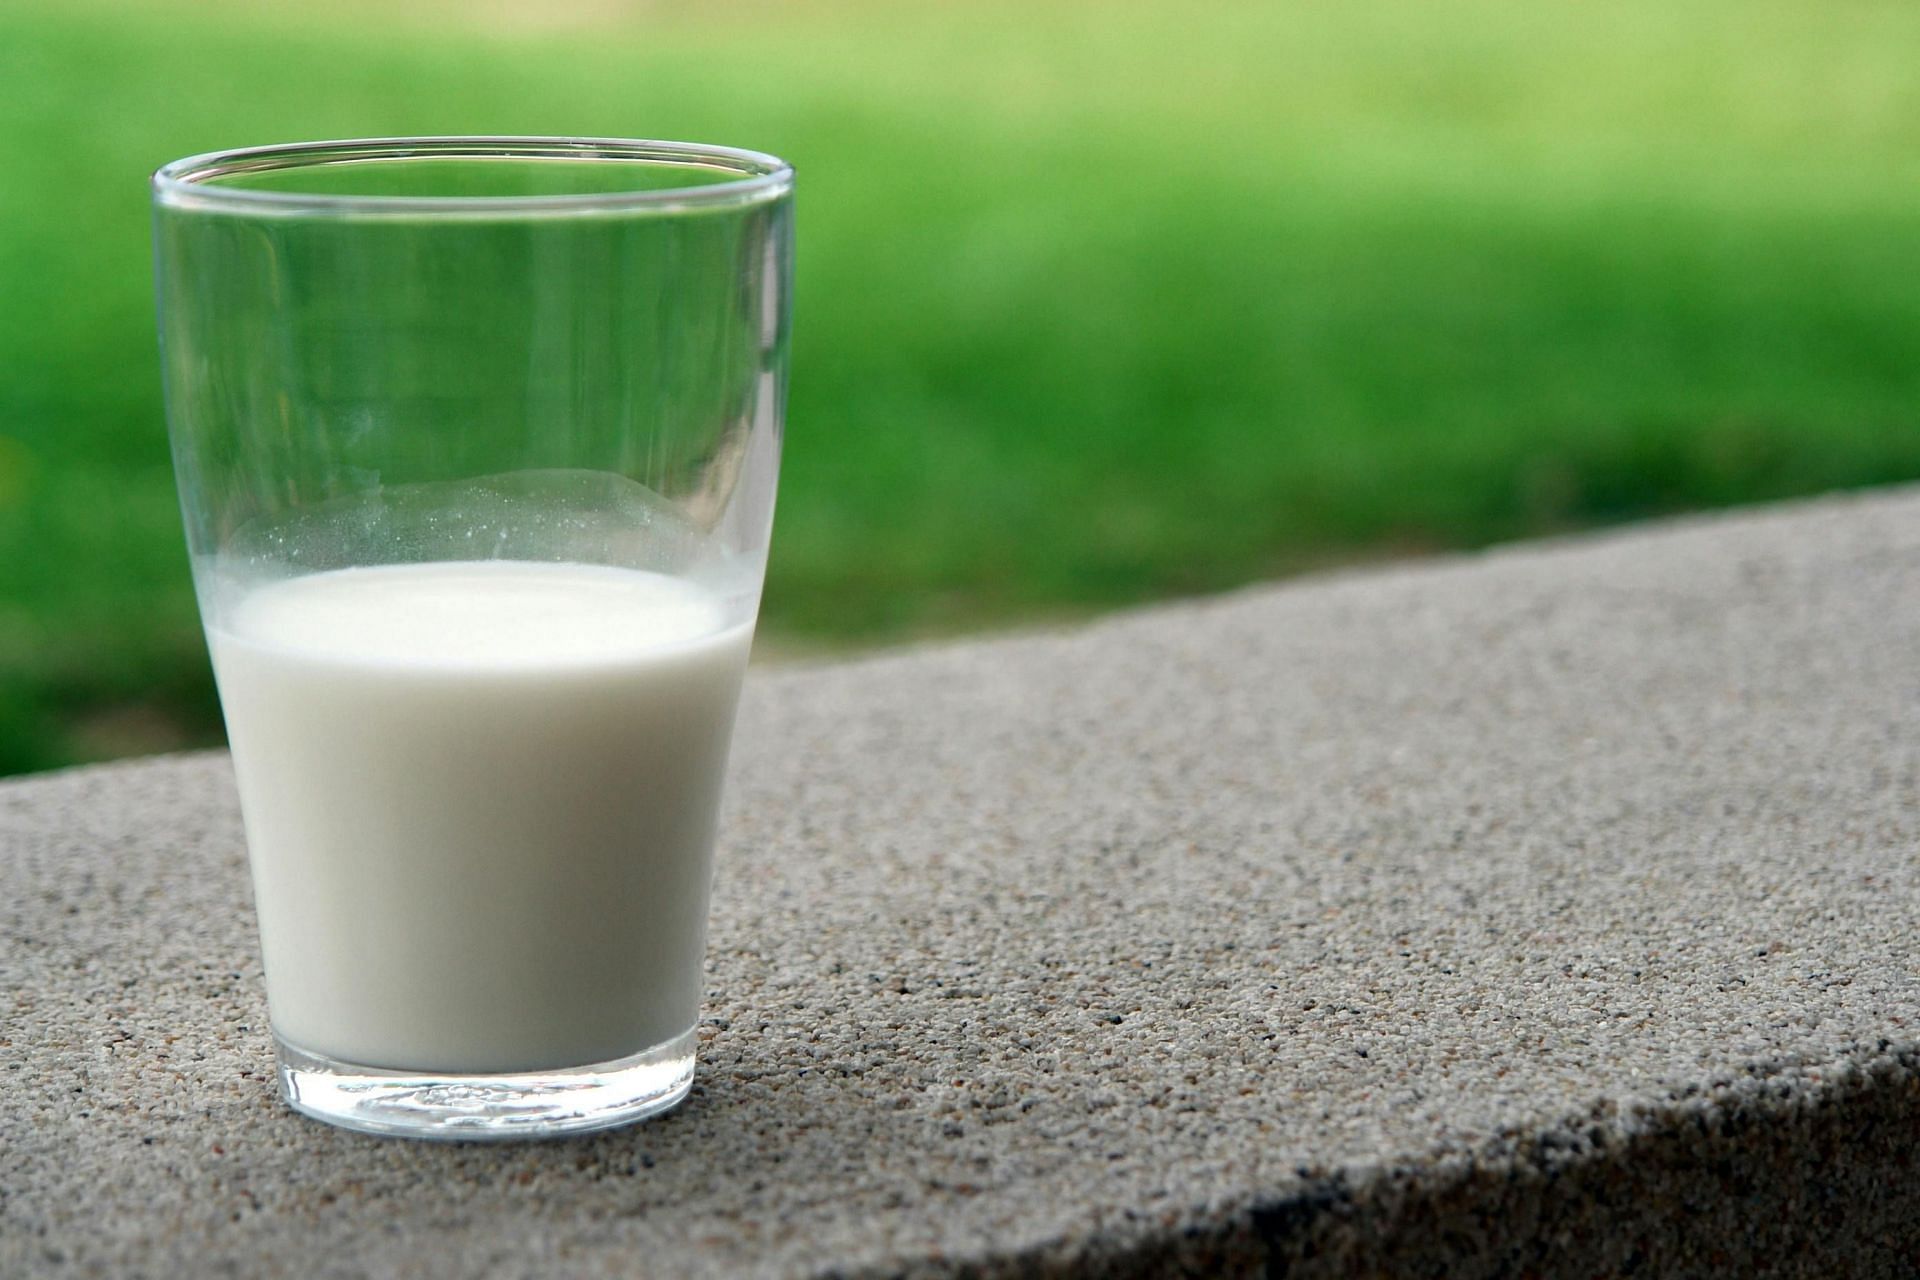 soy milk benefits (image sourced via Pexels / Photo by pixabay)